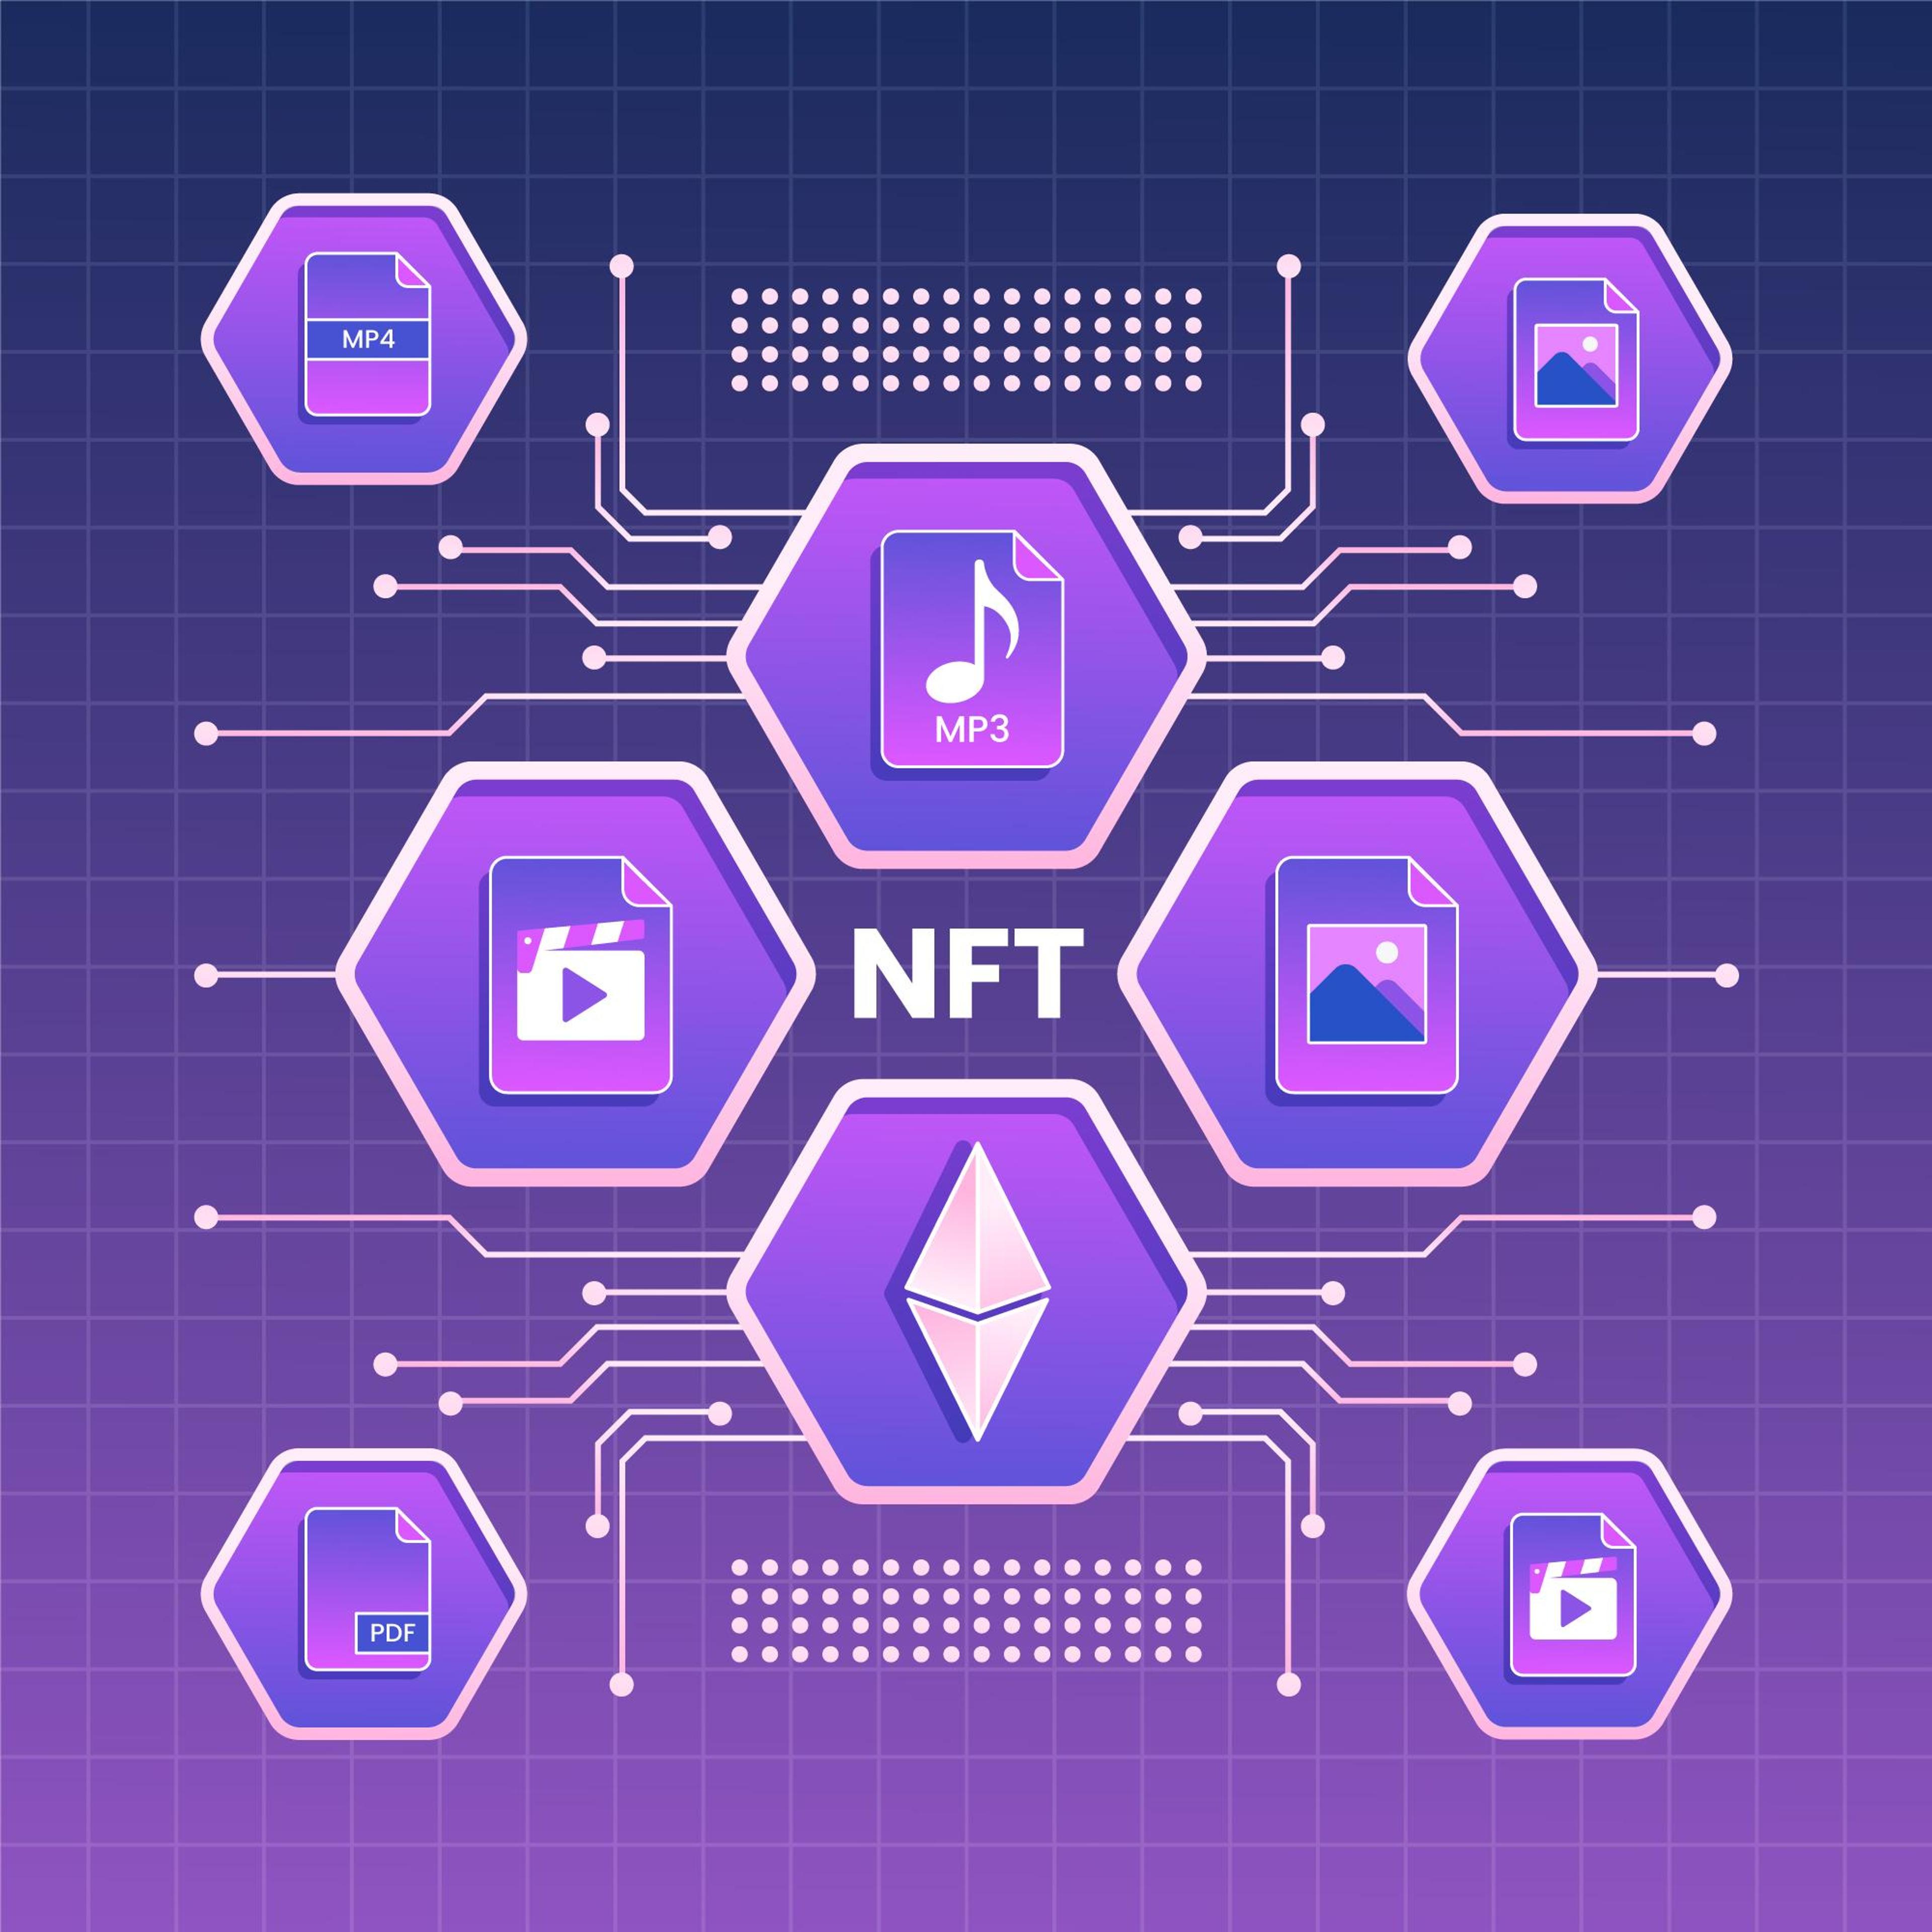 The Role of NFTs in Decentralized Finance: What to Expect from NFT Developers